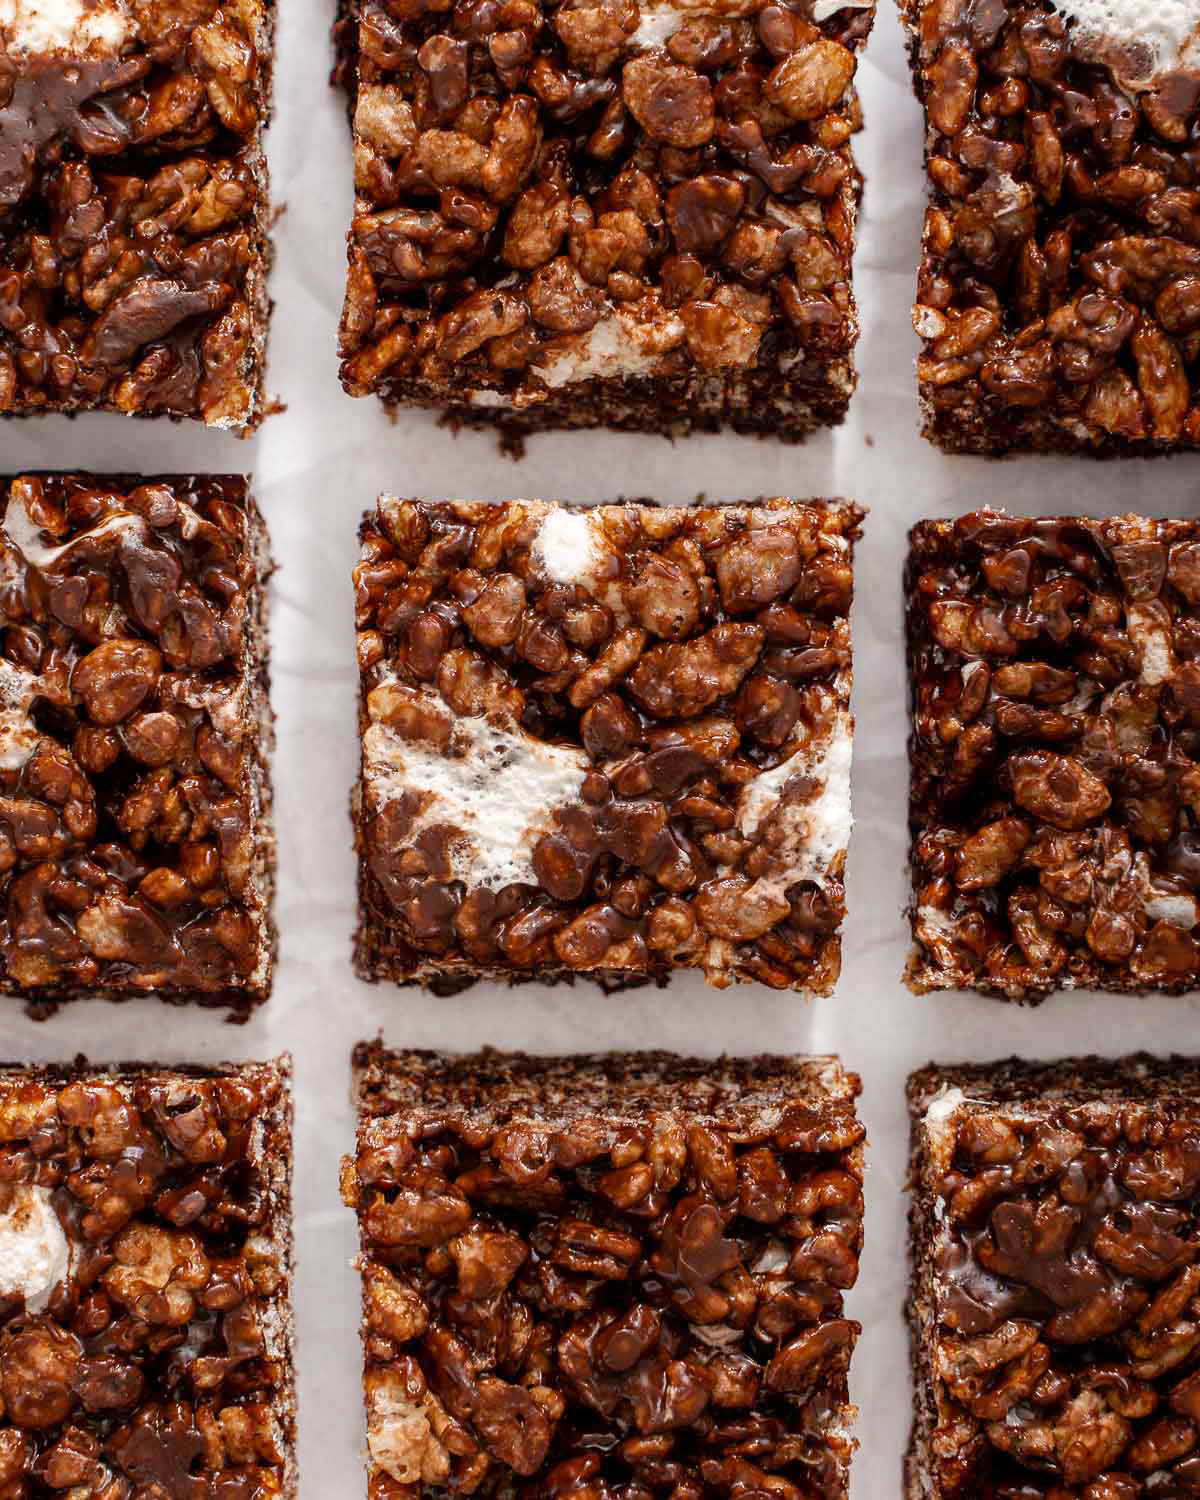 Up close of a grid of chocolate rice krispie treats on parchment paper.